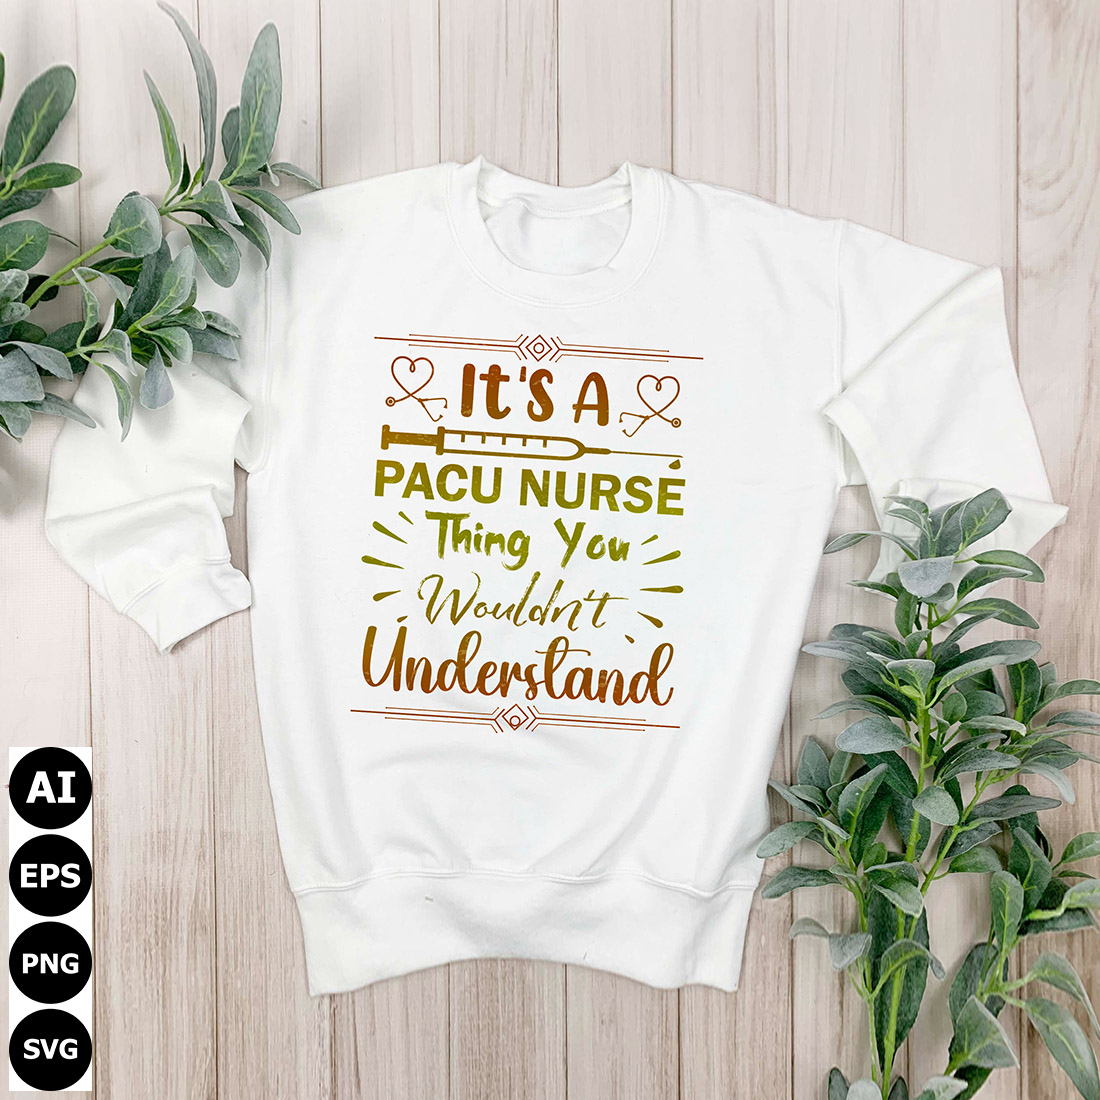 It's A PACU Nurse Thing You Wouldn't preview image.